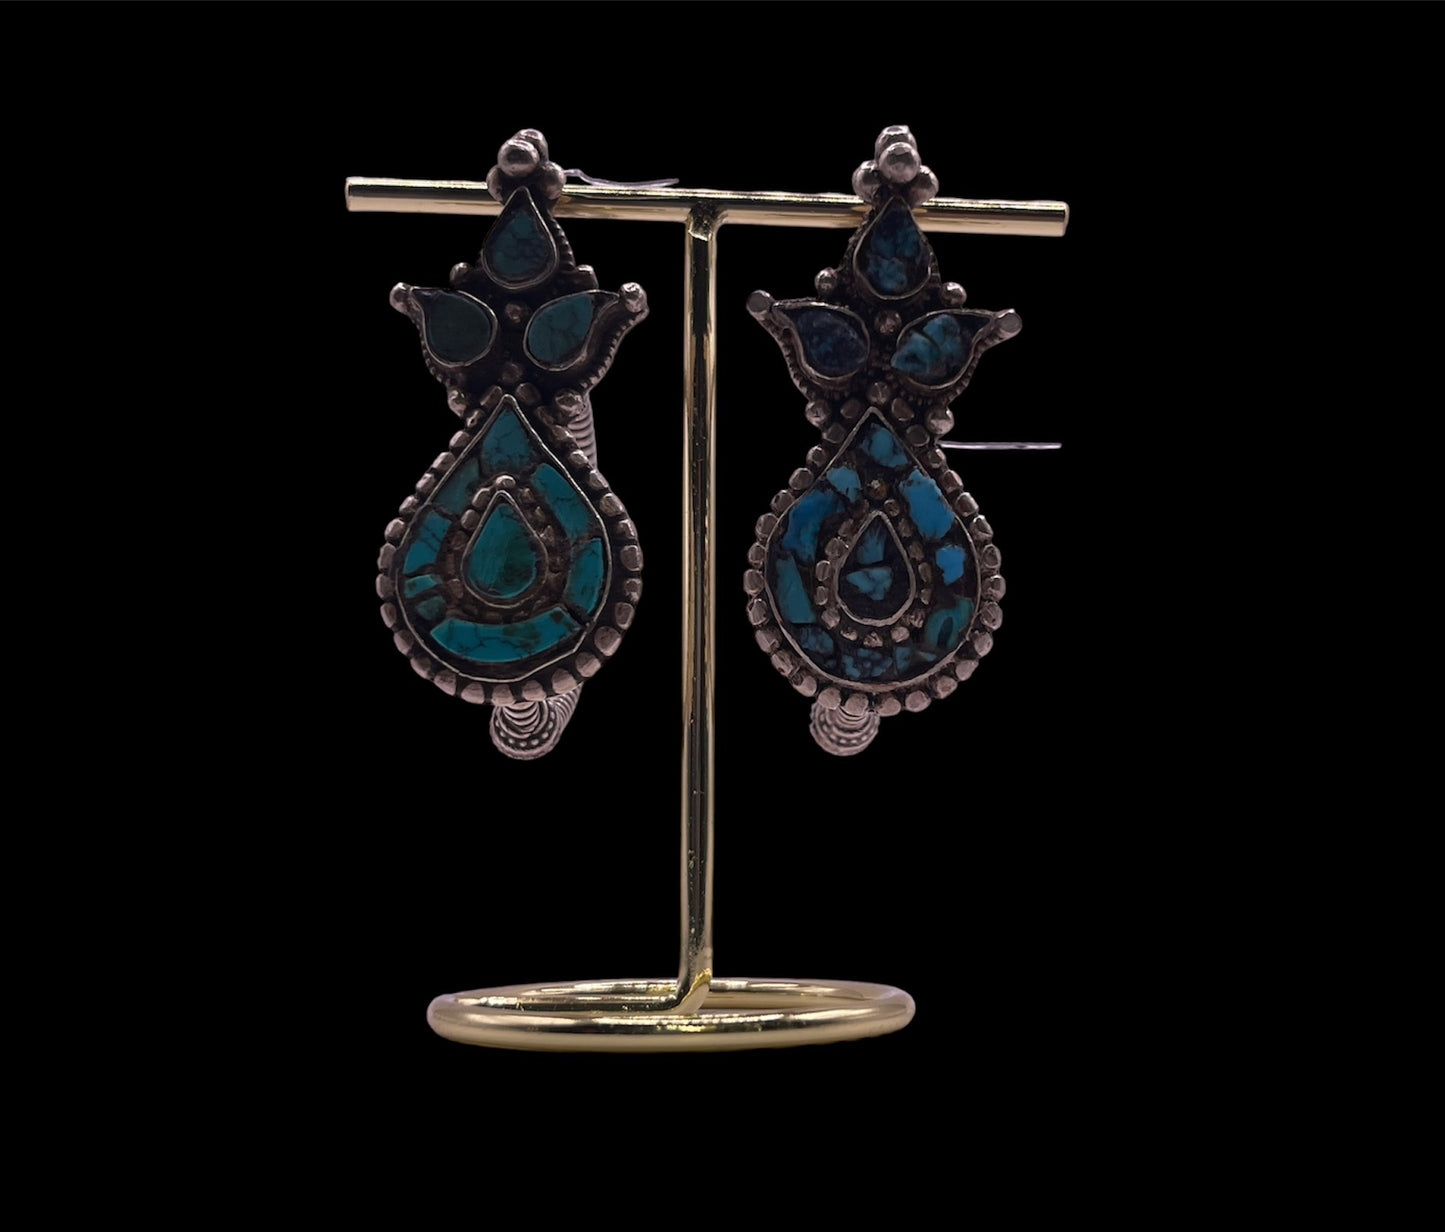 Pair of antique turquoise and silver Tibetan earrings -Ah long